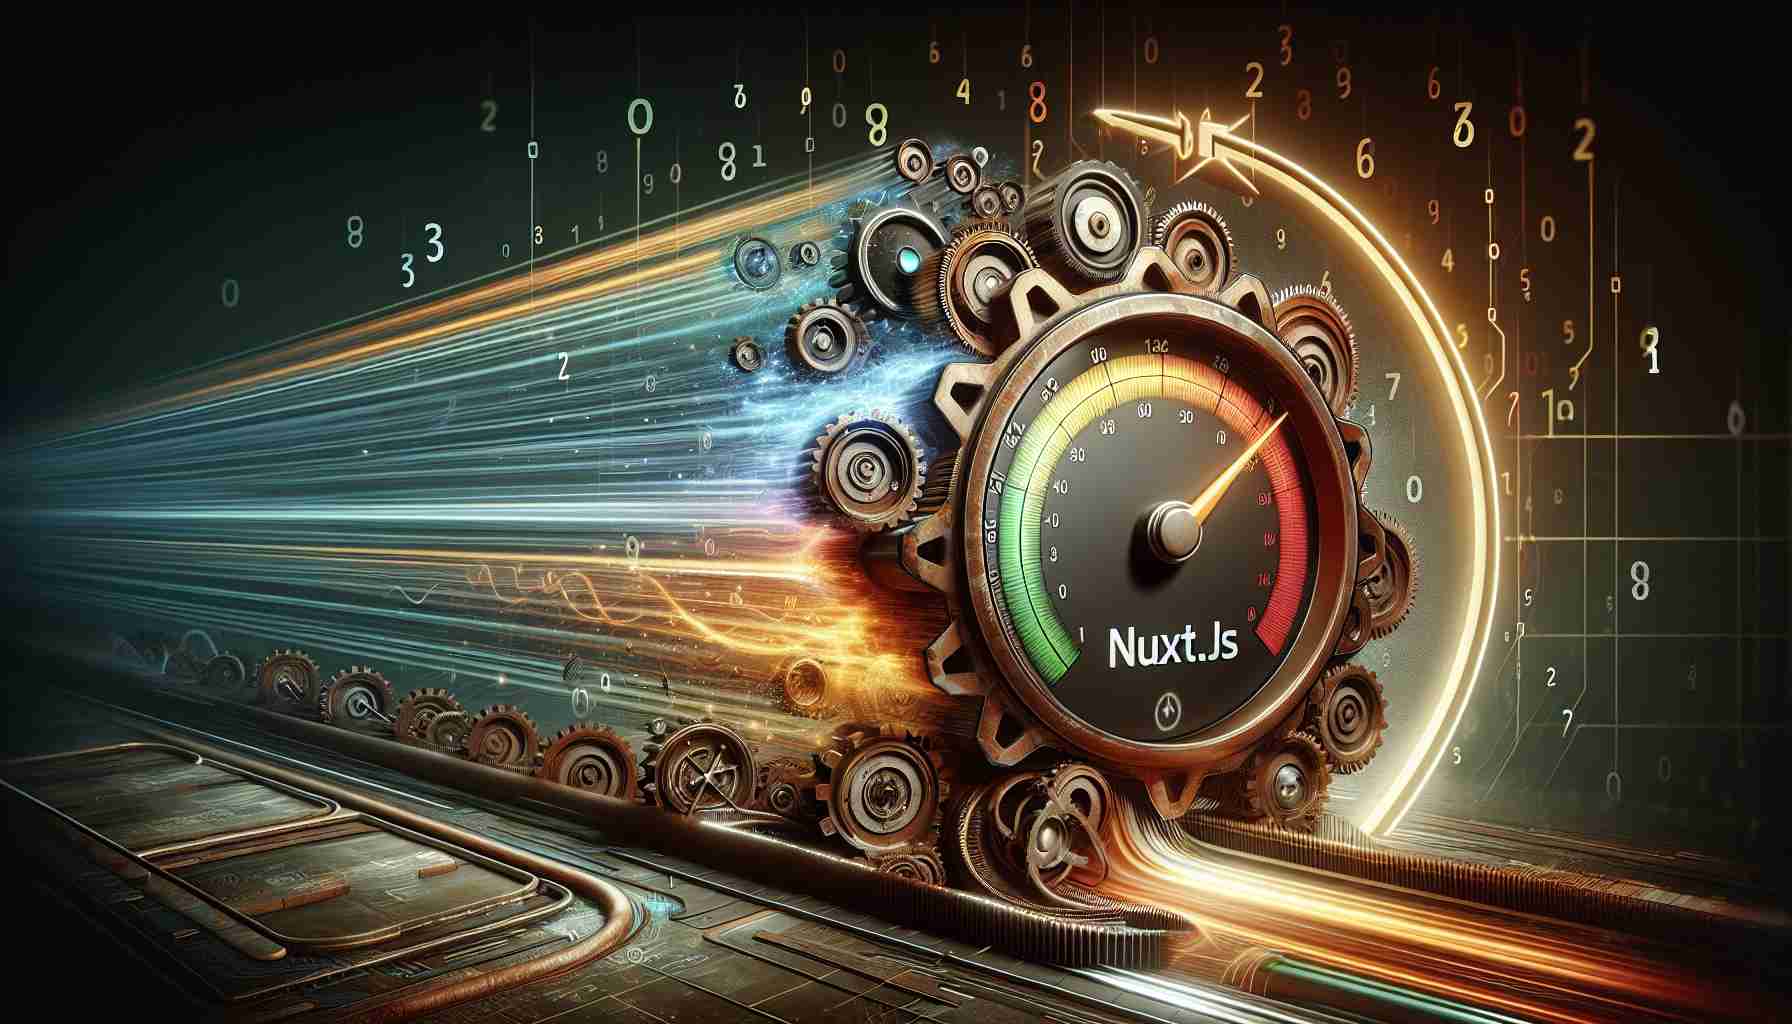 An Insight into Faster Web Experience with Nuxt.js